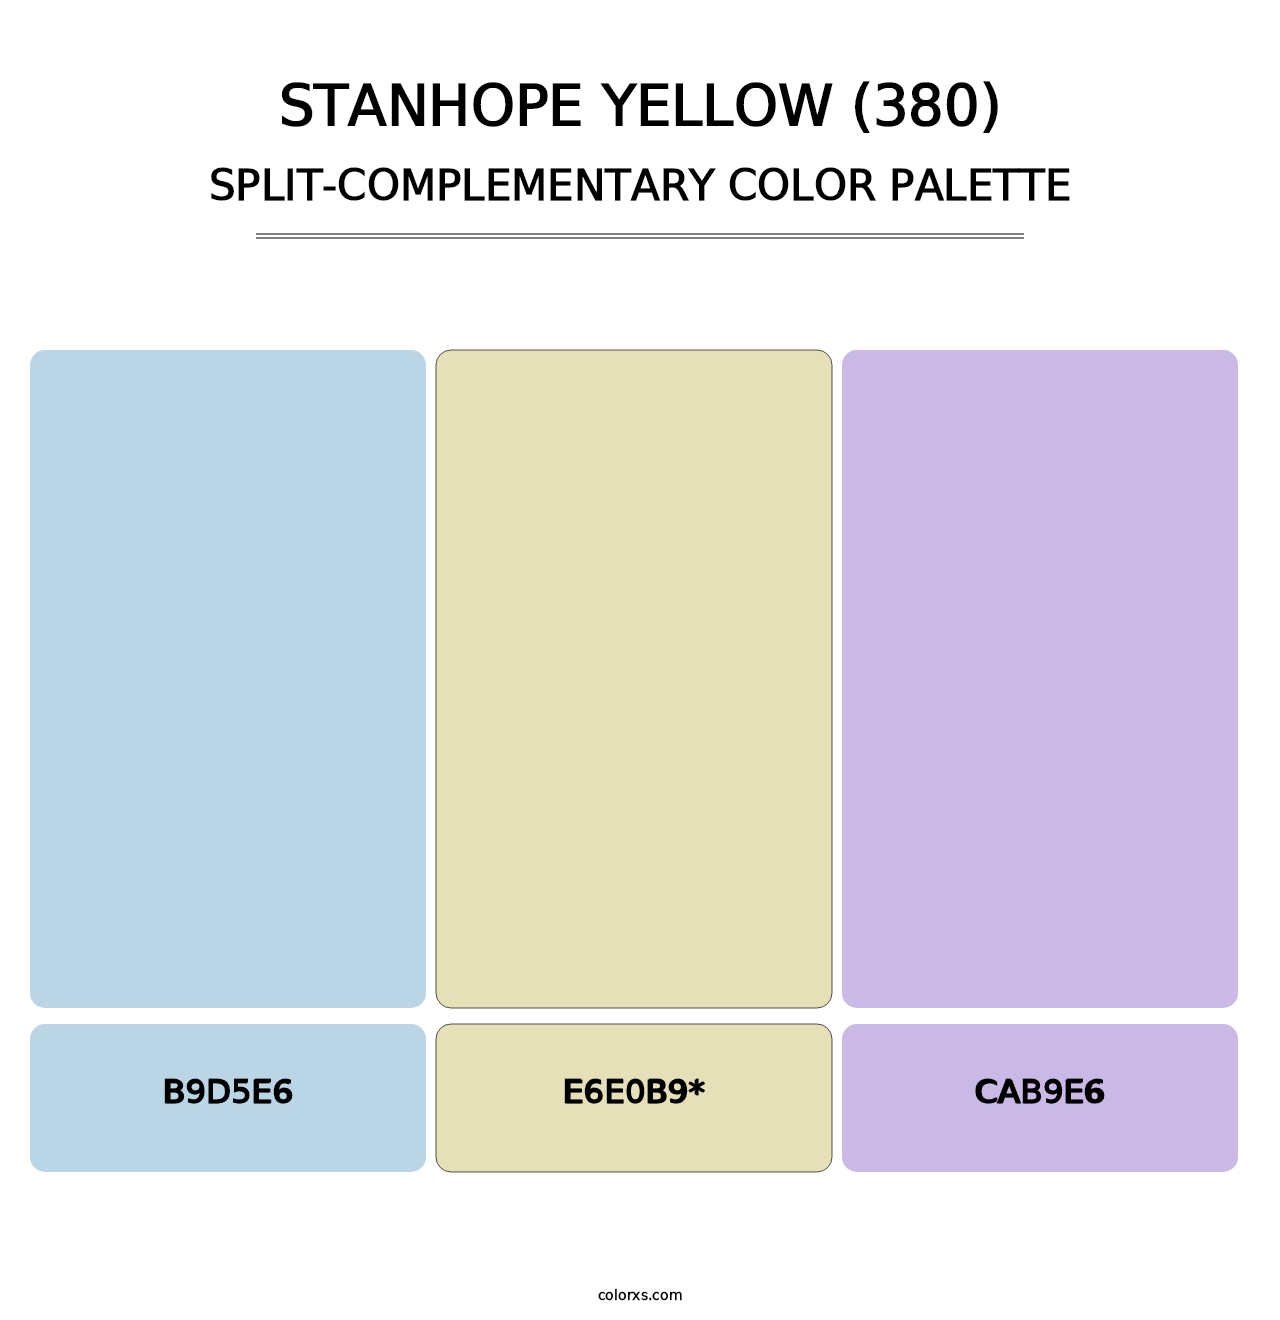 Stanhope Yellow (380) - Split-Complementary Color Palette